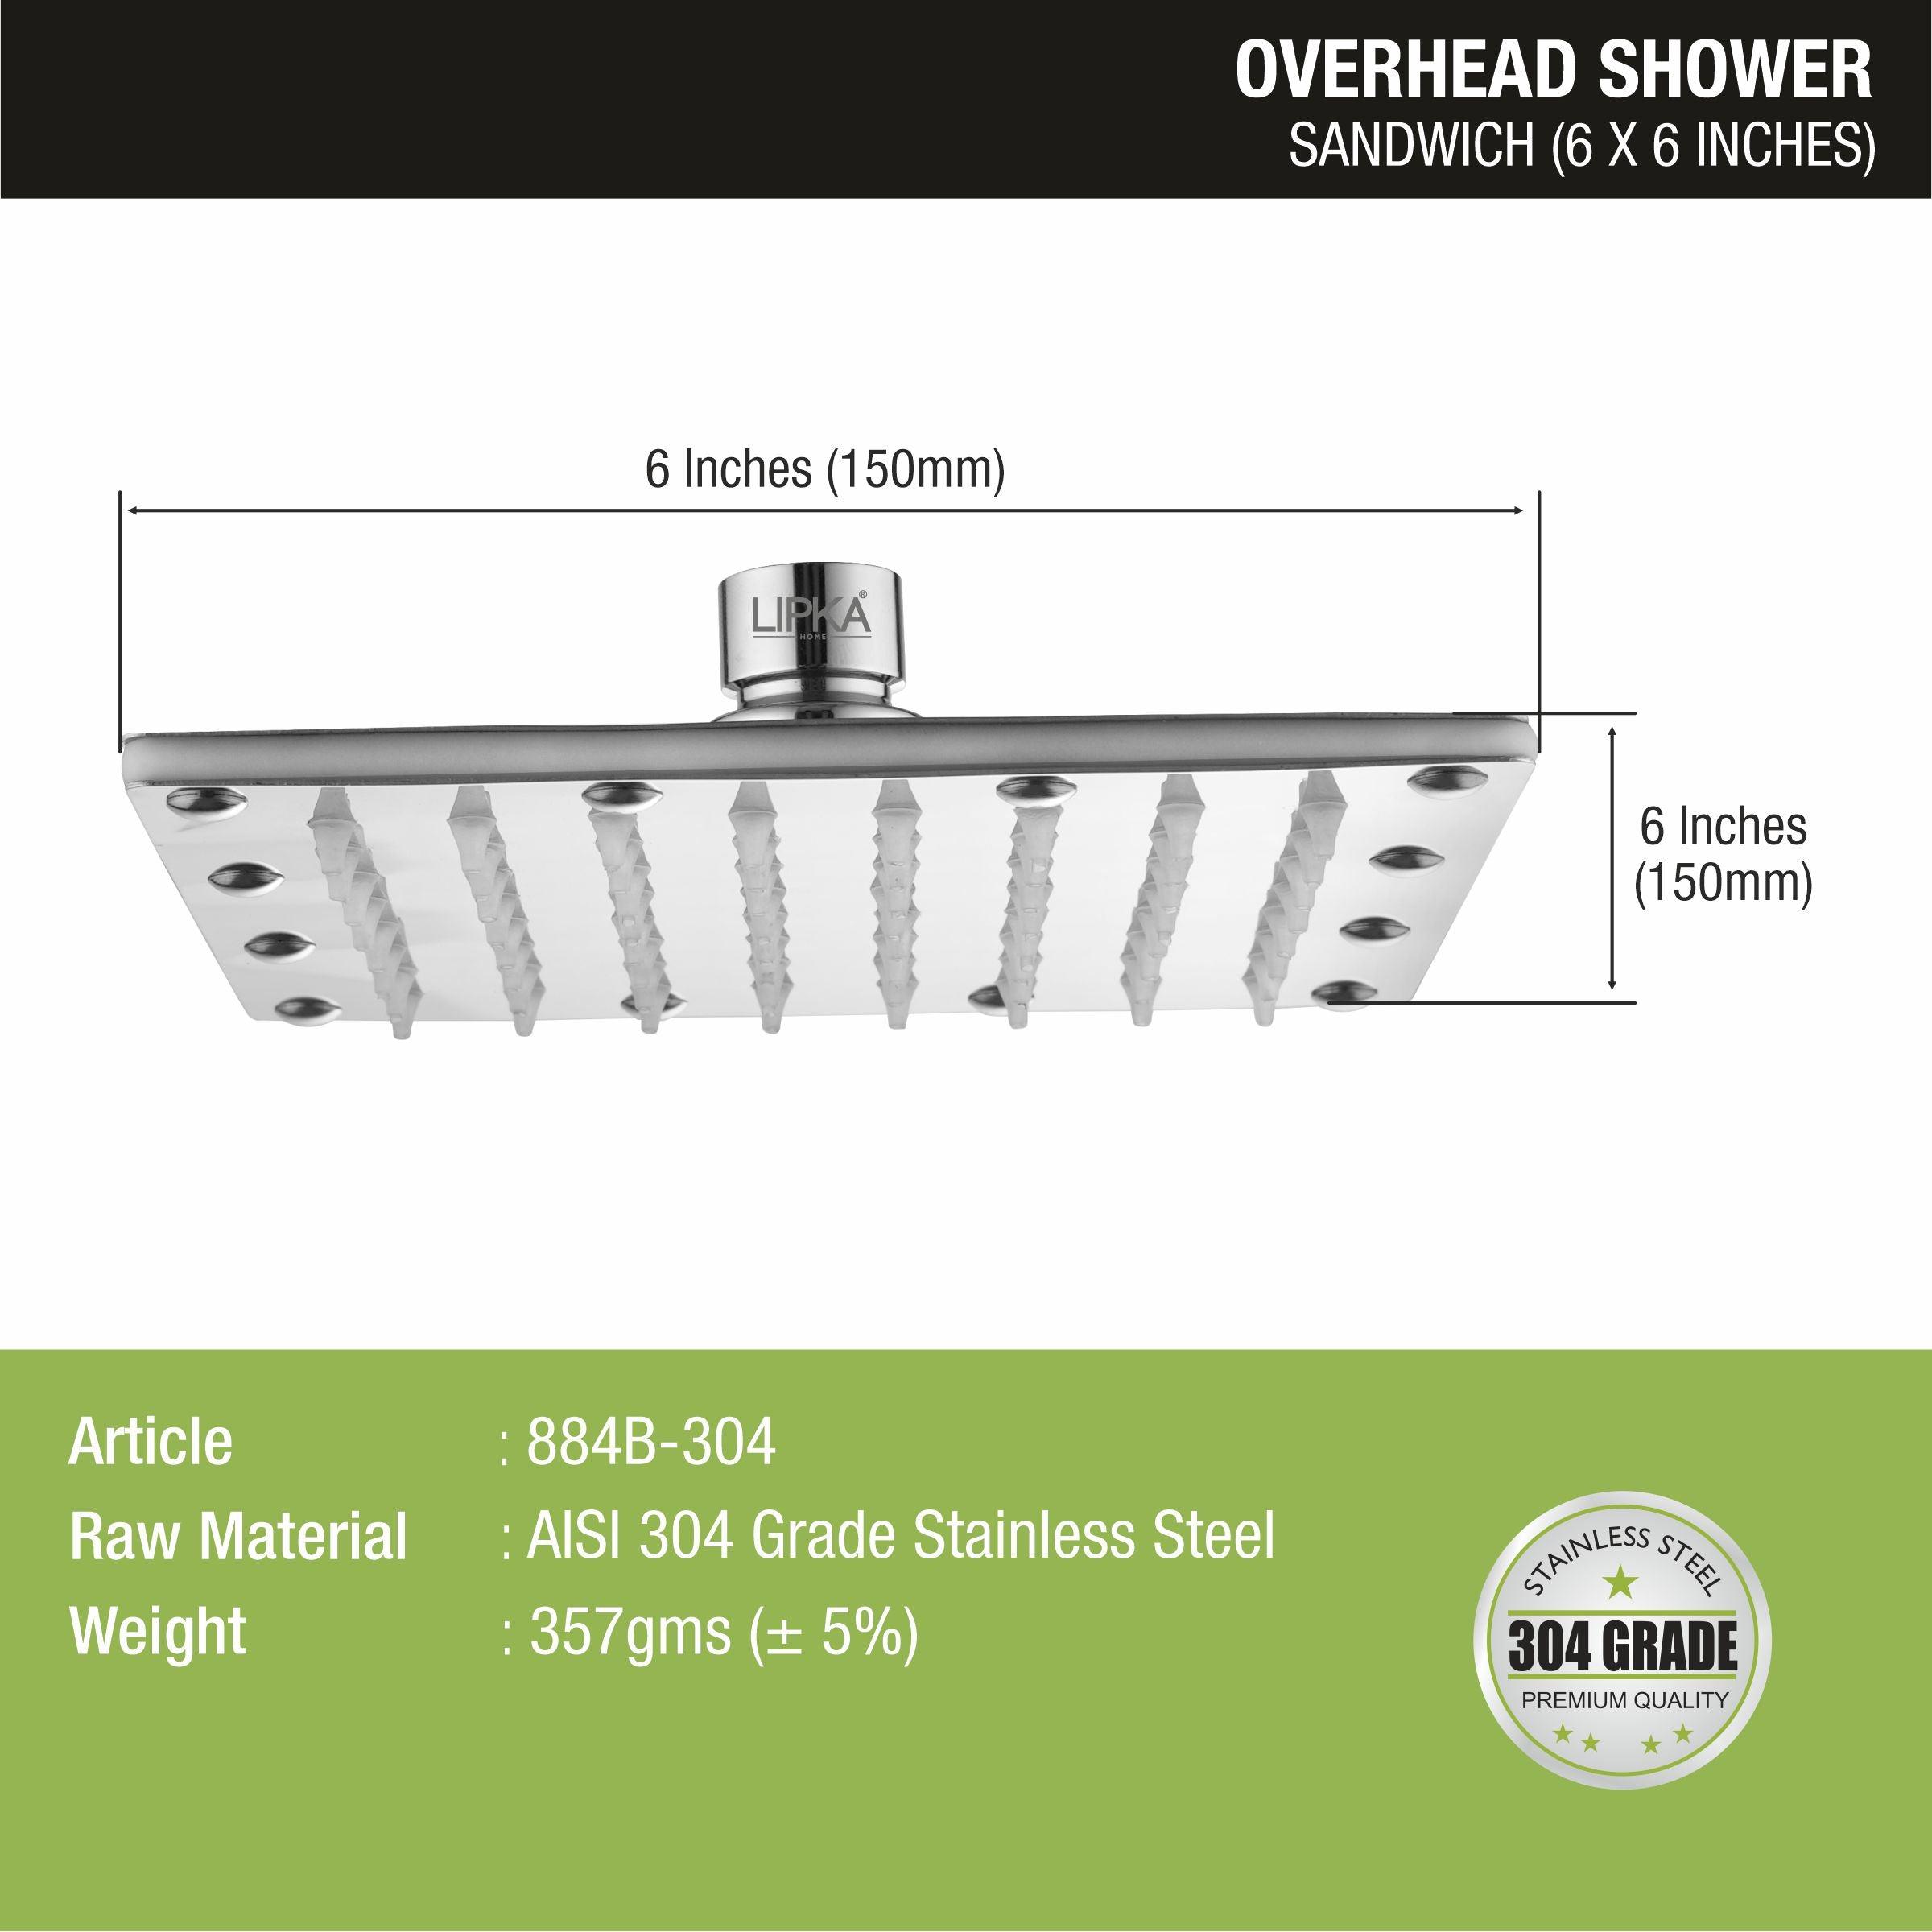 Sandwich Overhead Rain Shower (6 x 6 Inches) sizes and dimensions